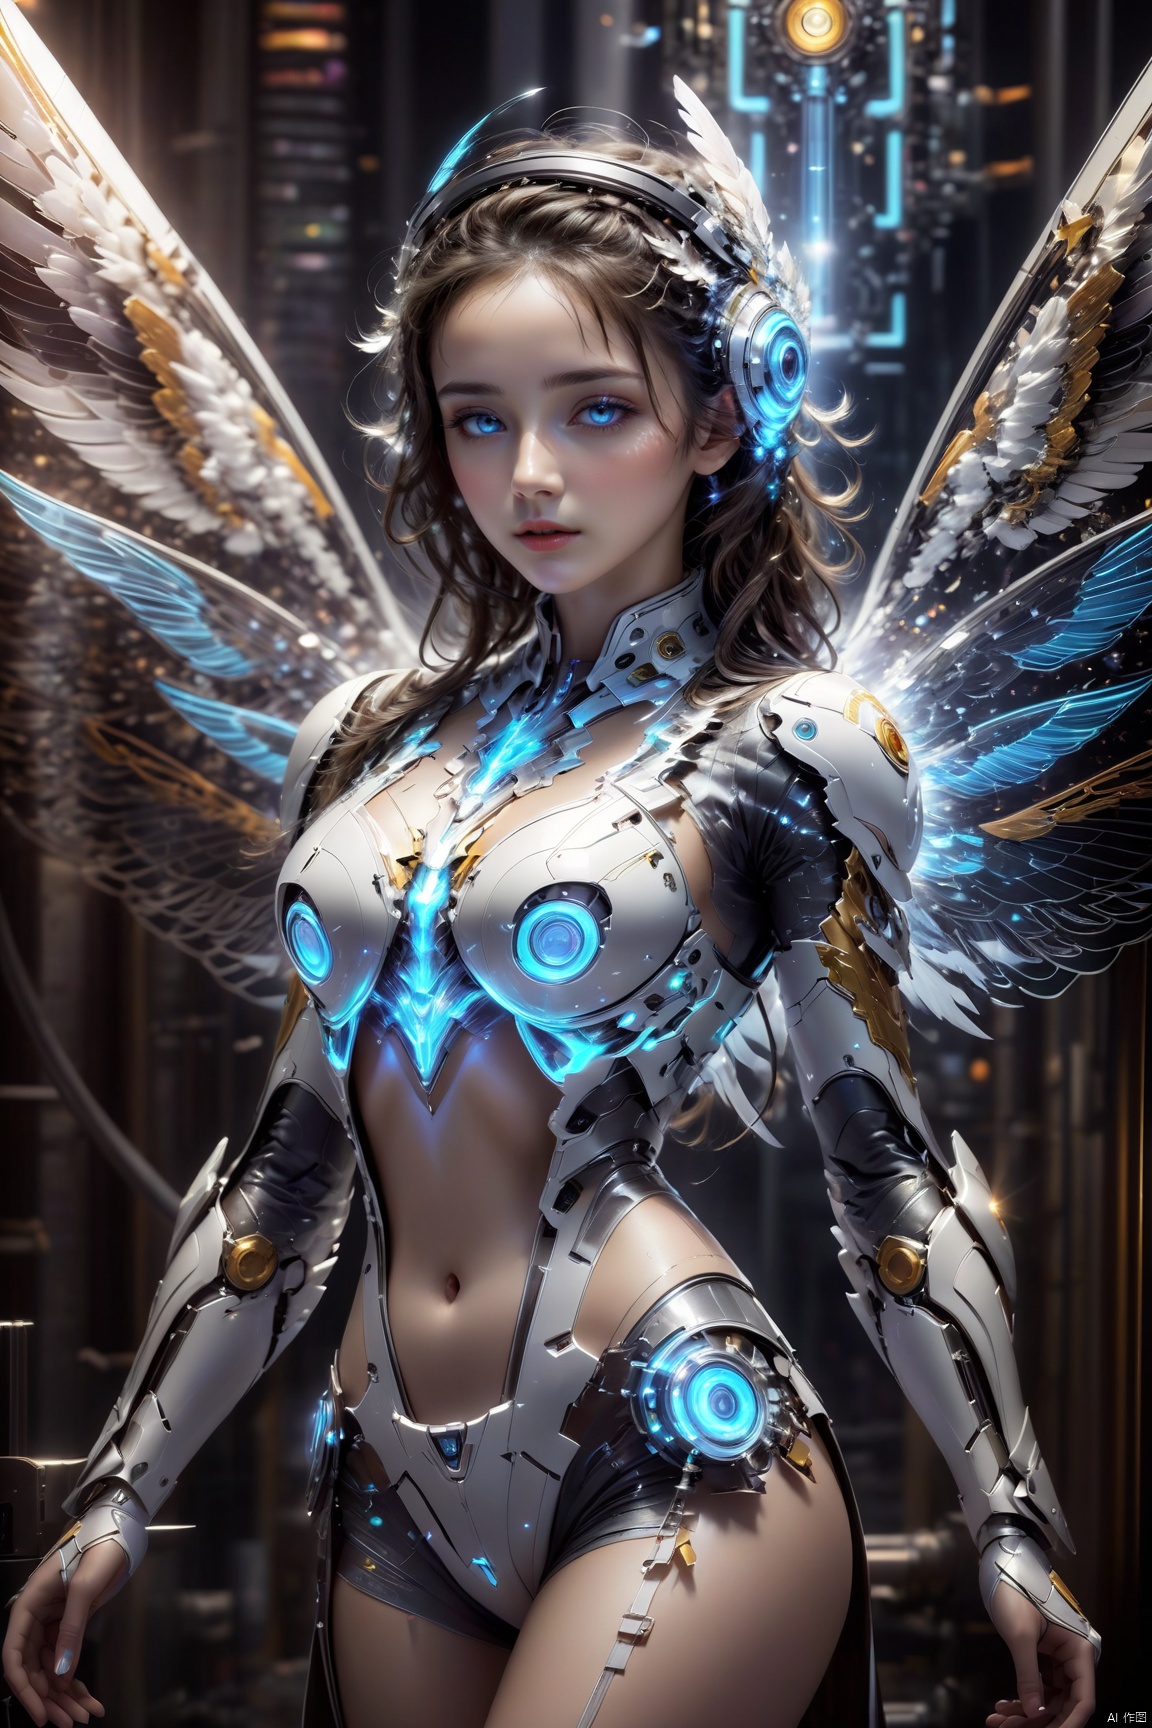 Masterpiece,Ultra high res,Extremely detailed,Realistic,1 girl,Finely detailed beautiful eyes and detailed face,Machinery,Mecha,(Science Fiction),white mecha,luminescence,(dreamy wings:1.5),science fiction mecha wings,Colorful colors,High contrast,High saturation,Realistic,(Dynamic pose:1.2),Perky breasts,White skin,Visual impact,(sexy full body photo:1.2),Cybercity background,Fantasy,Ultra detailed,Detailed face,Movie light,Movie lens,(Movie special effects),wings, hhfhb